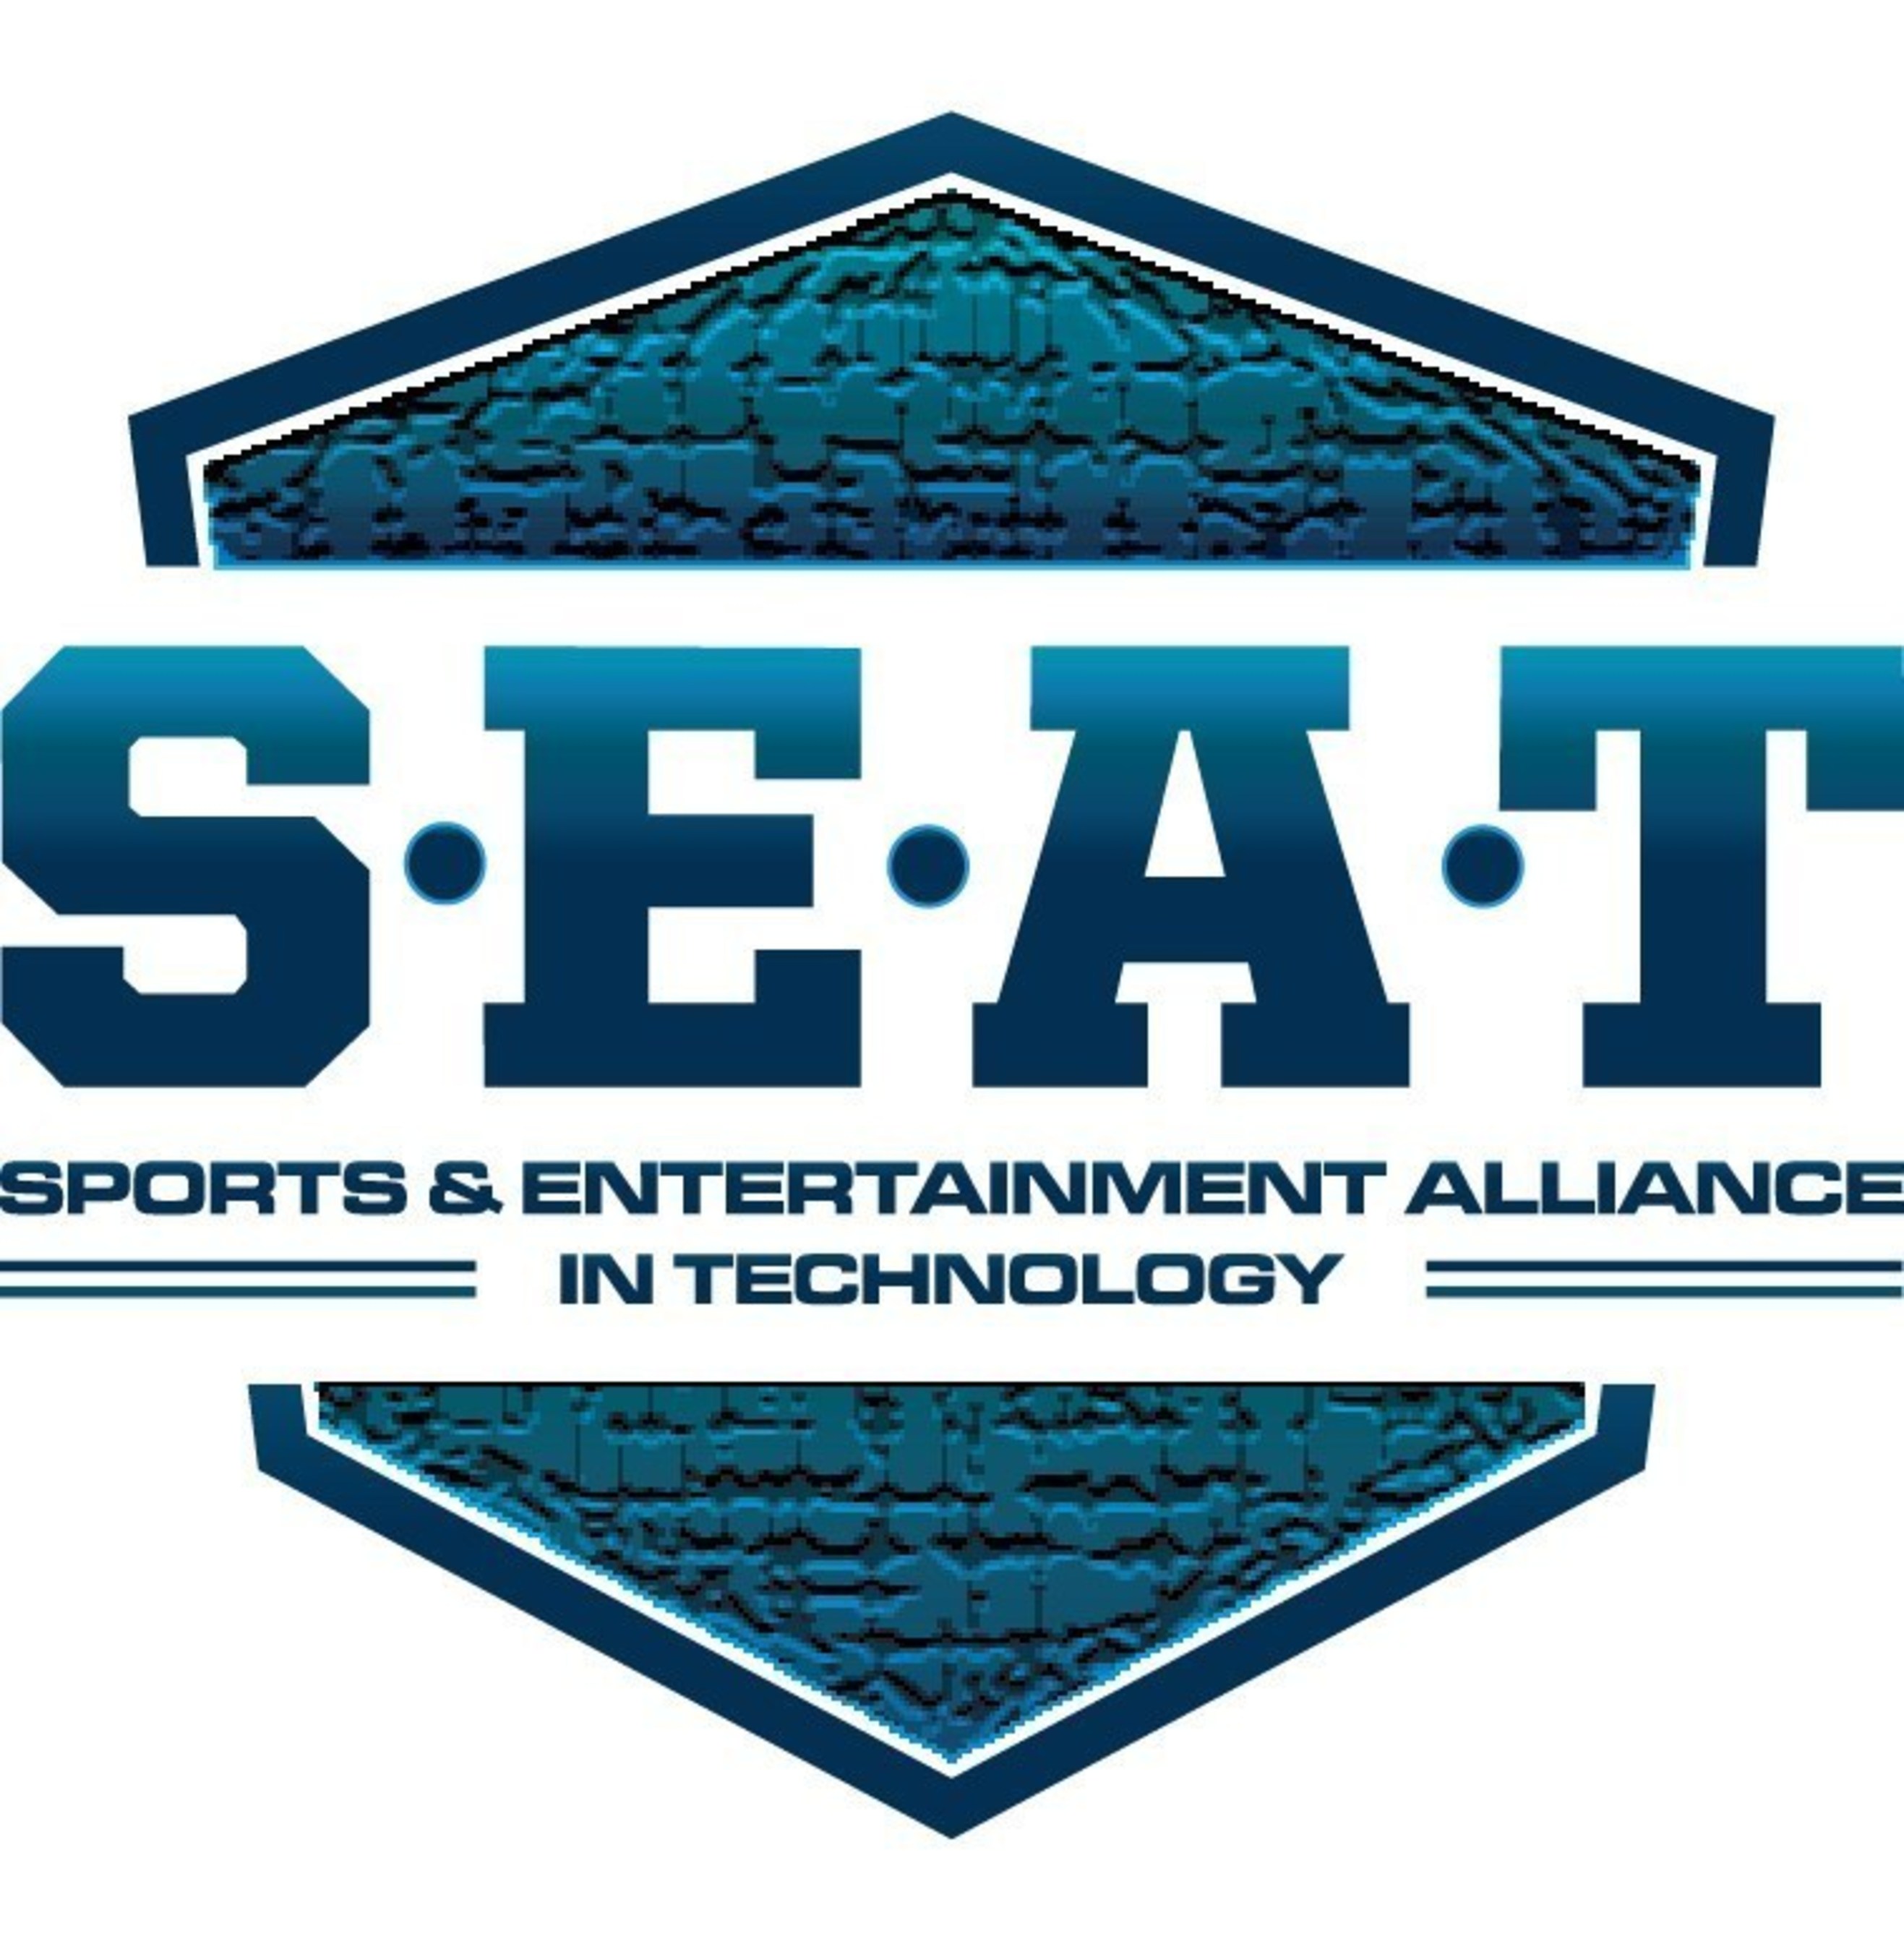 SEAT Sports & Entertainment Alliance in Technology